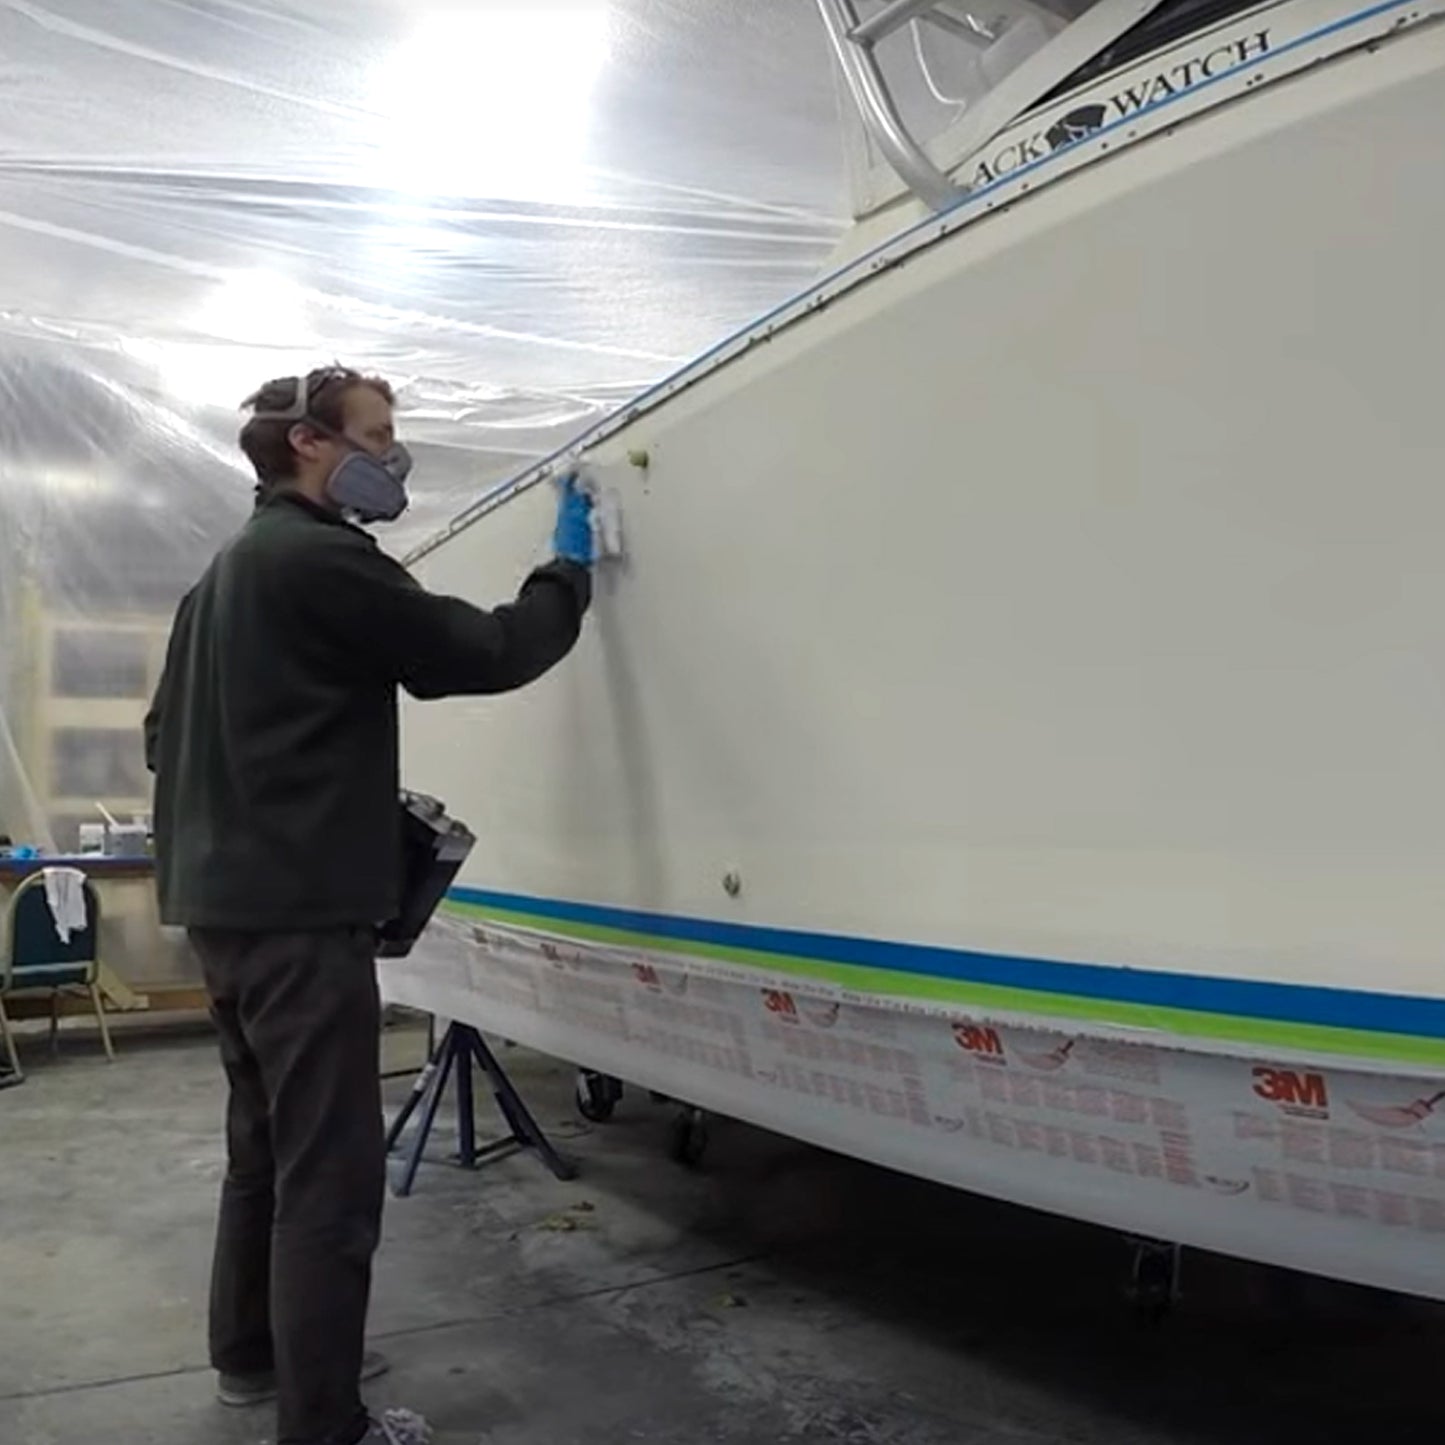 TotalBoat Dewaxer & Surface Prep Solvent being used on a boat